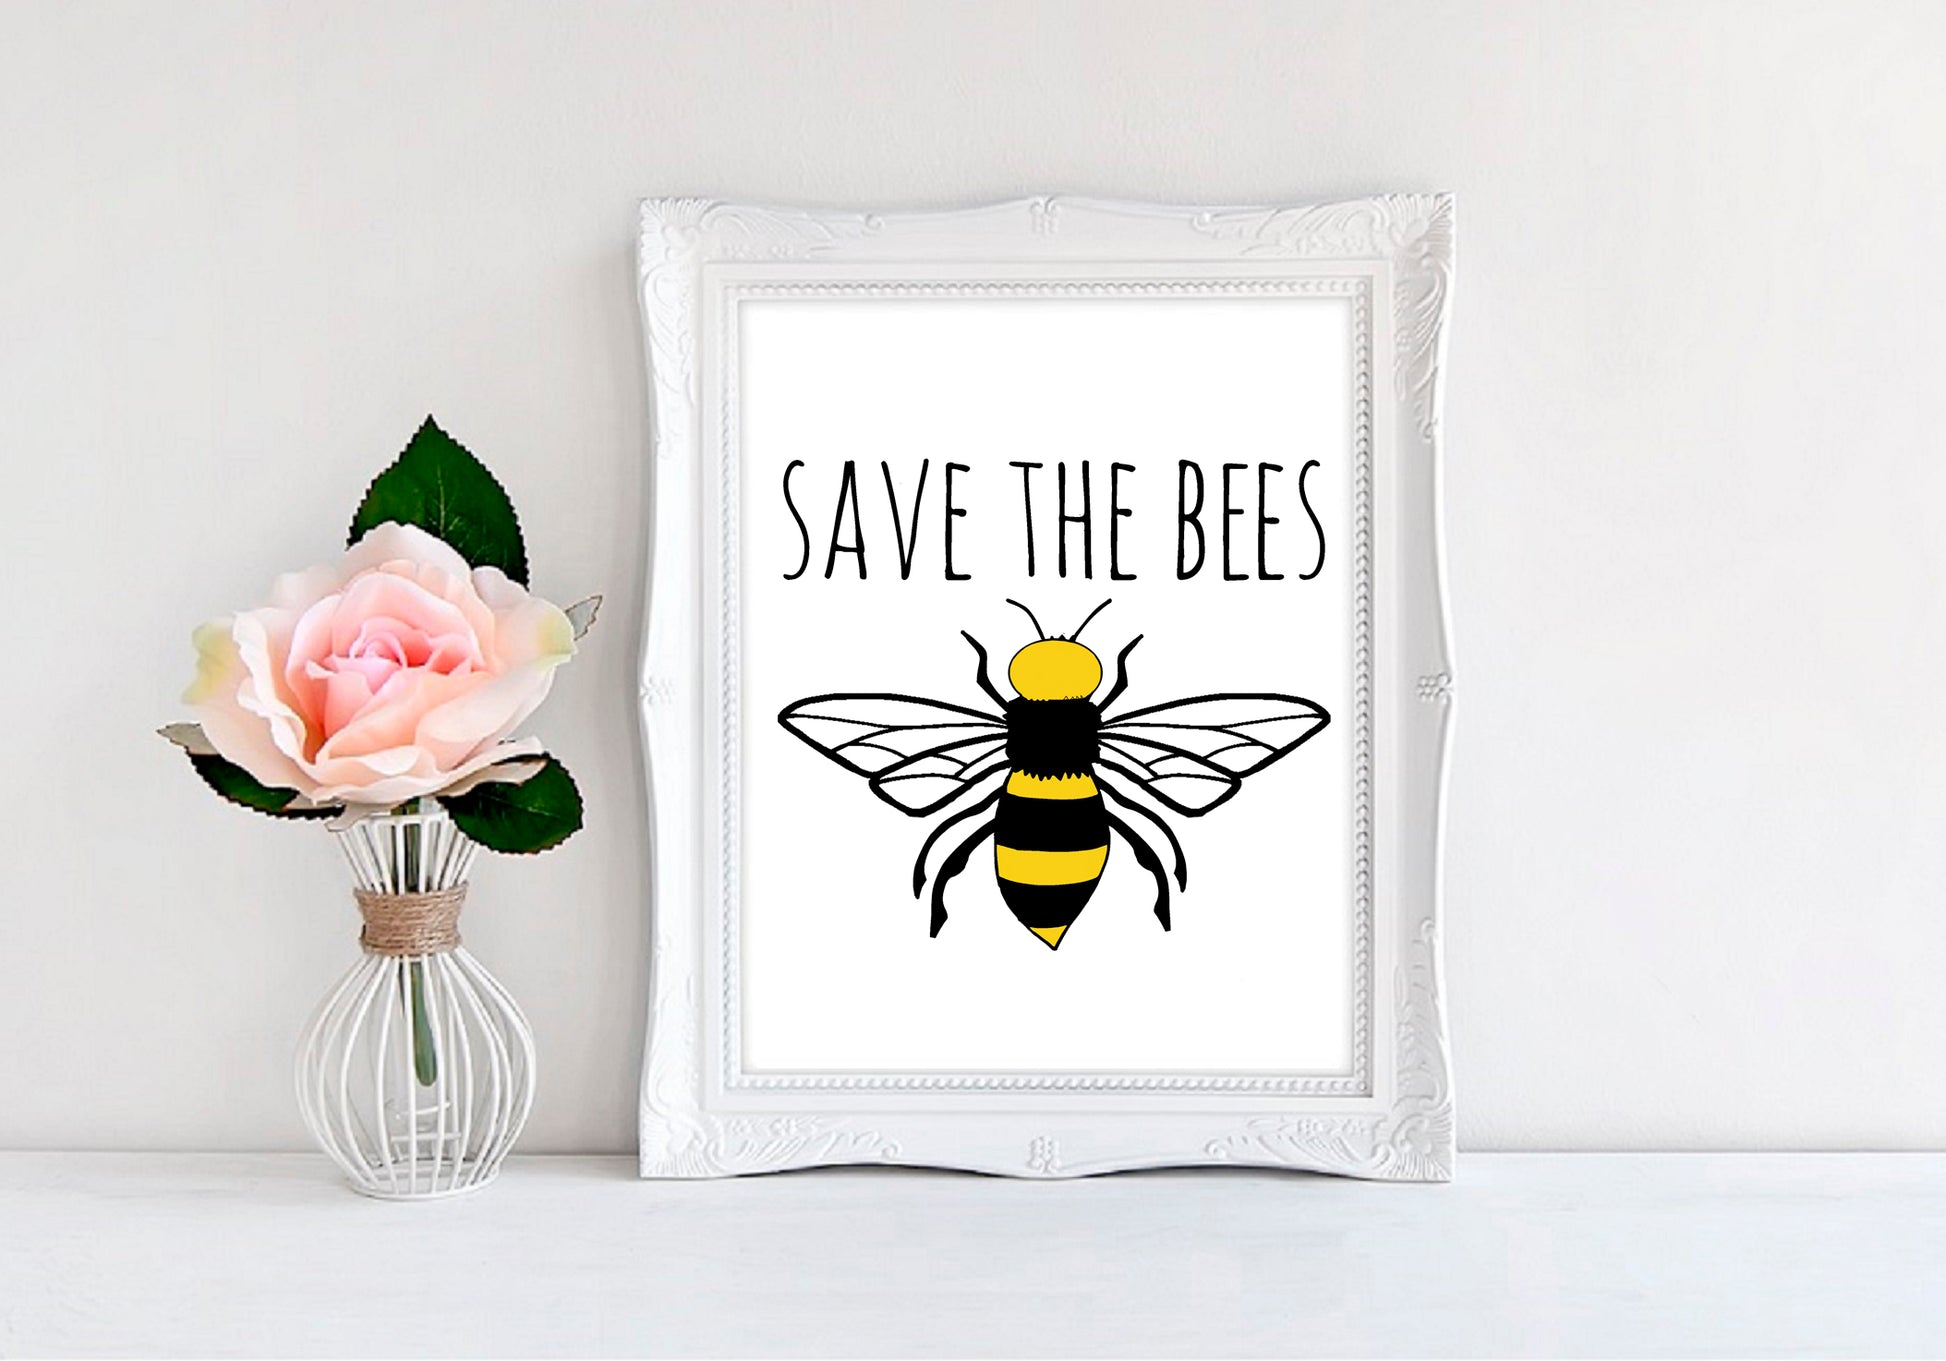 Save The Bees - 8"x10" Wall Print - MoonlightMakers